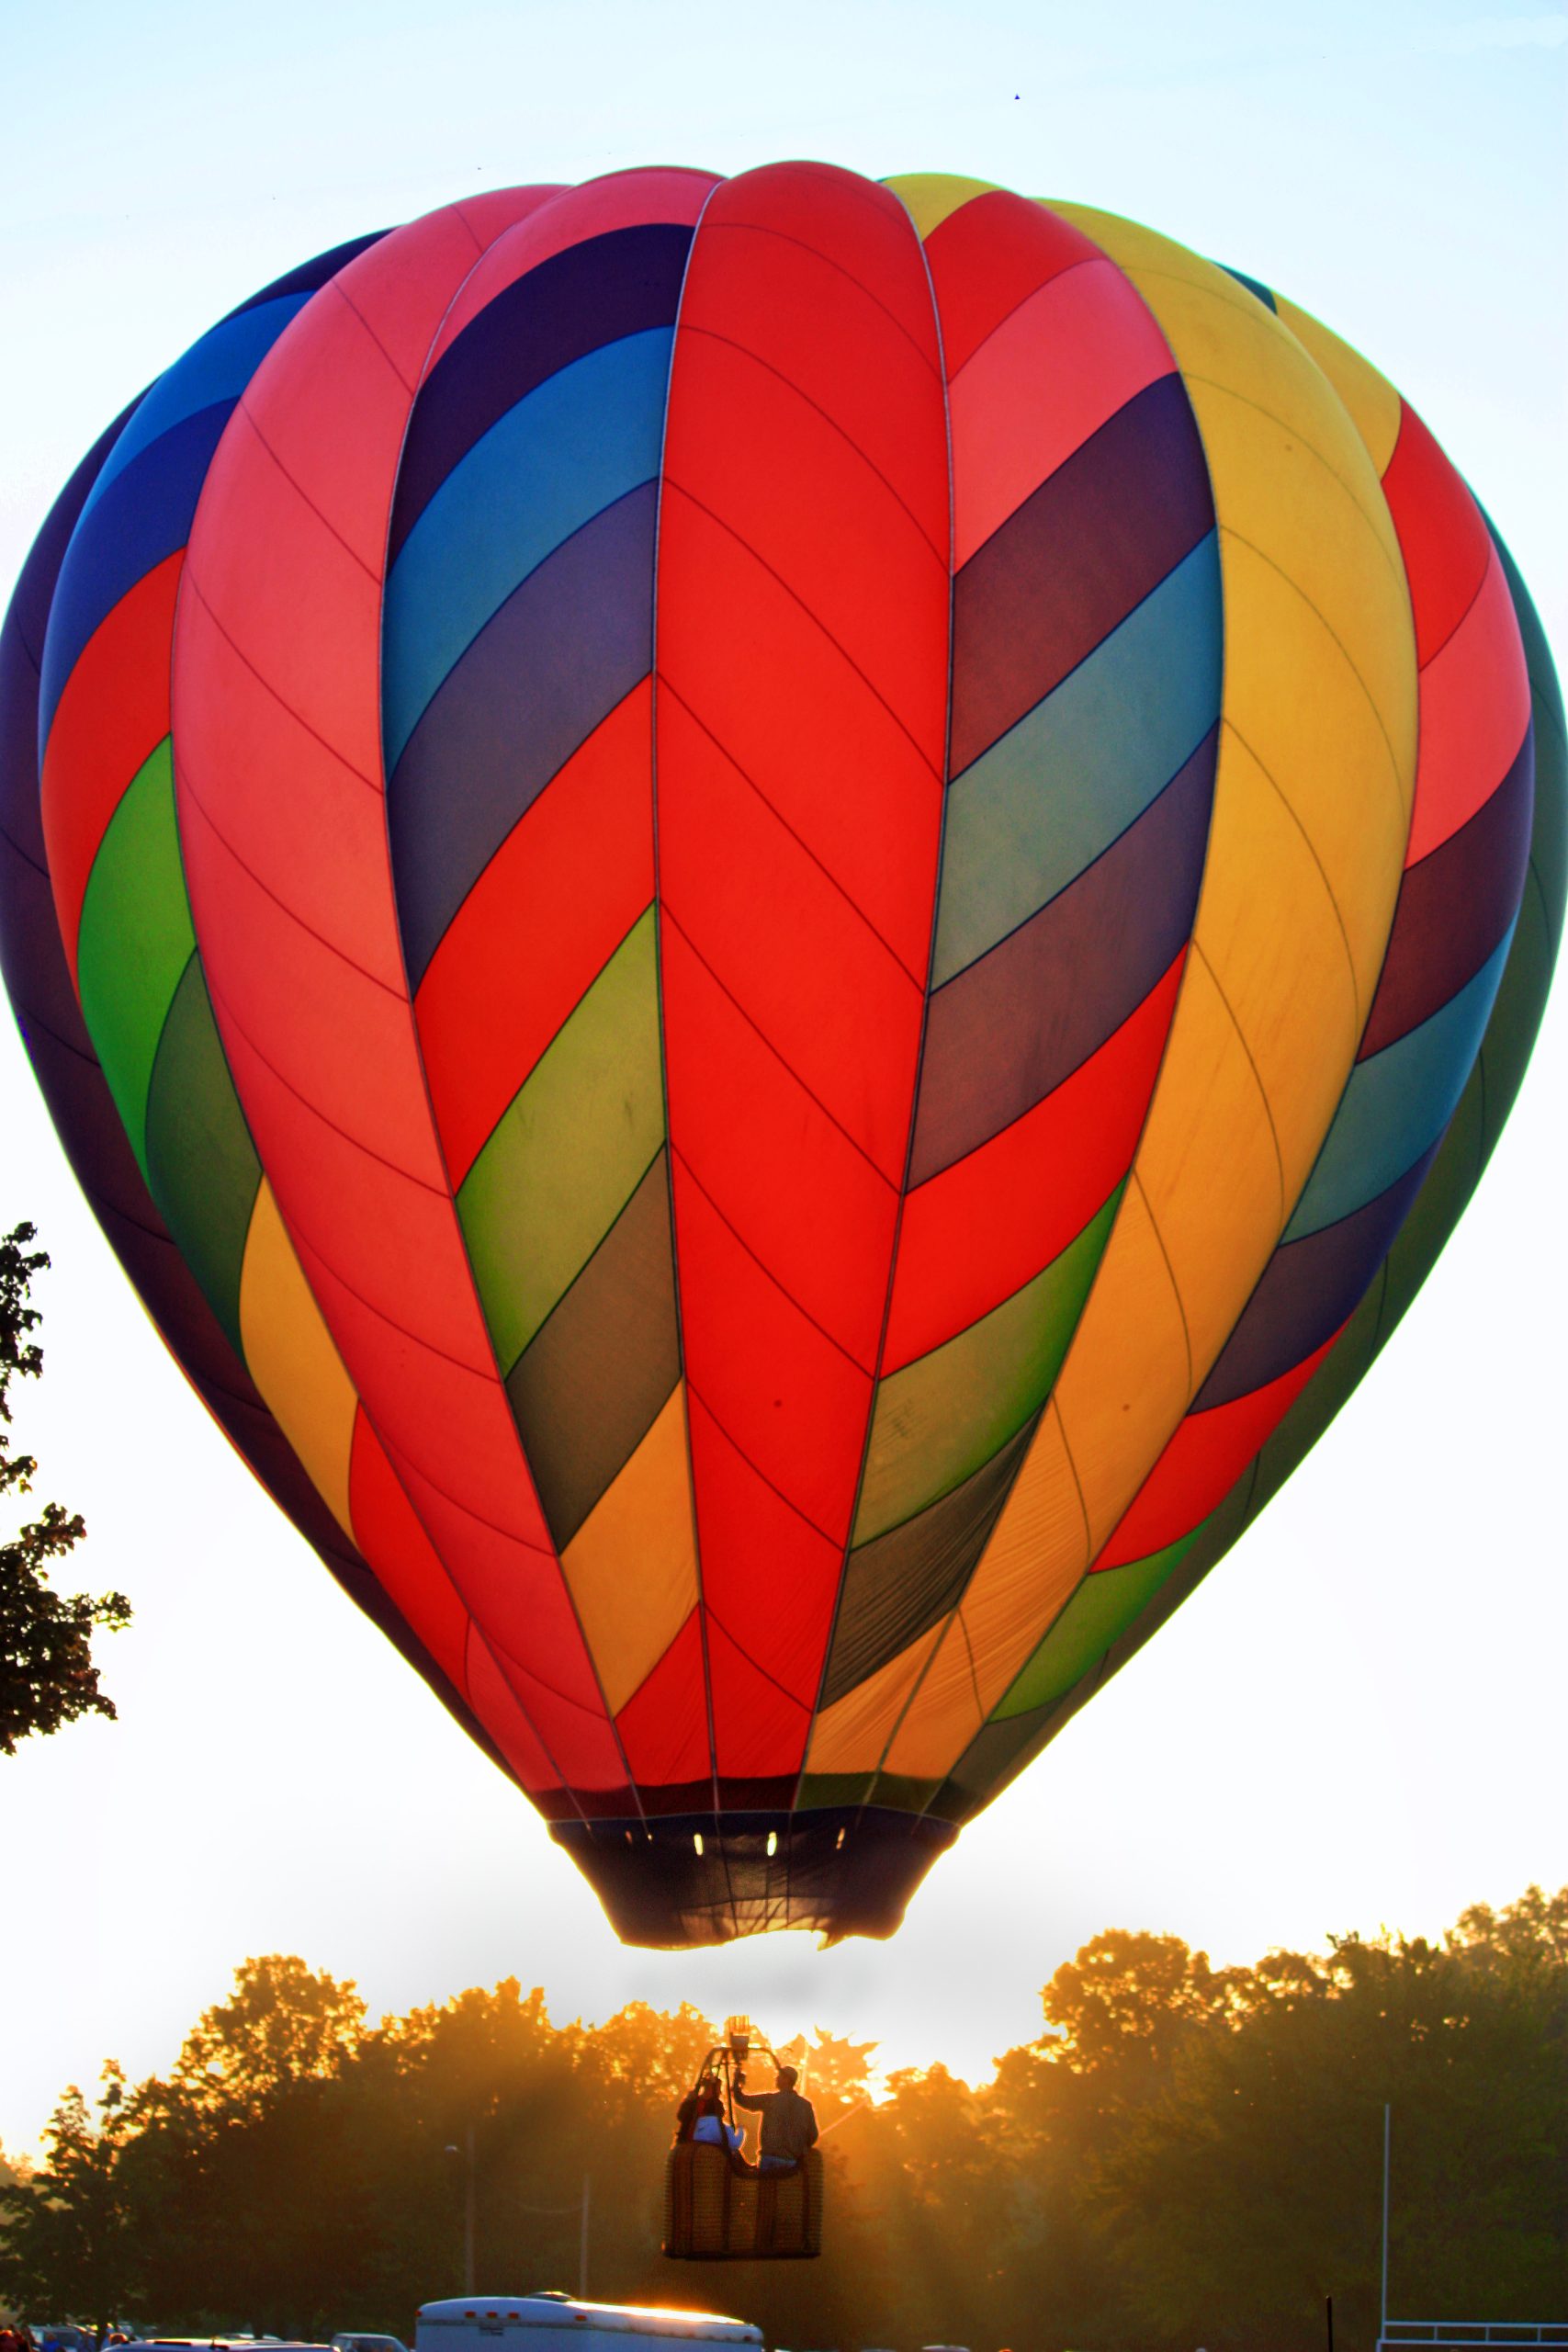 Balloon At Sunrise (user submitted)